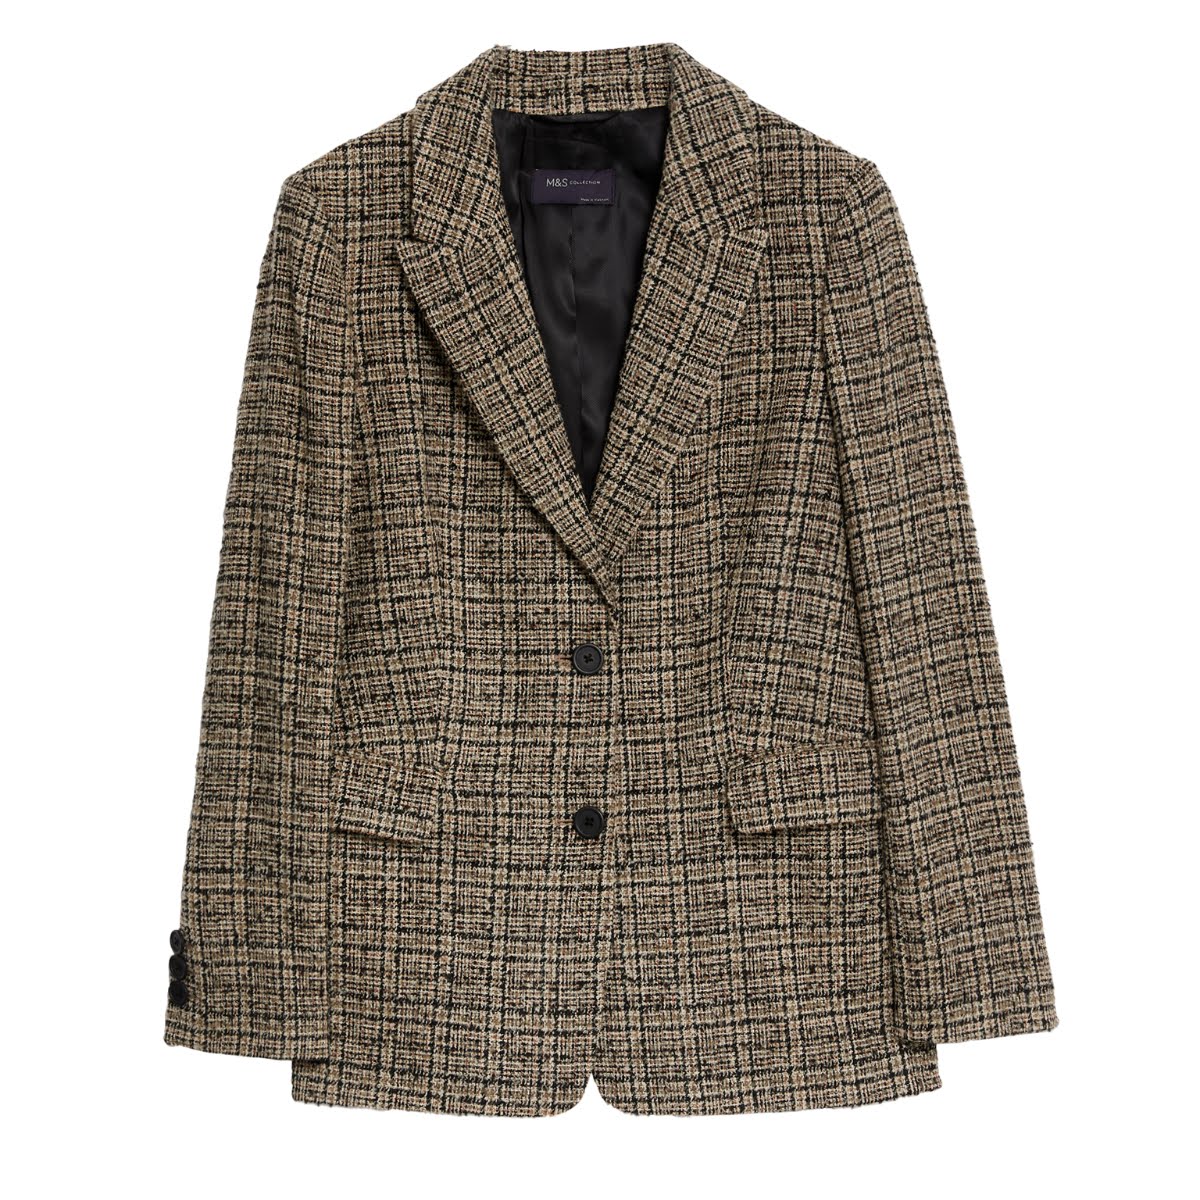 Tweed Relaxed Checked Blazer, €105